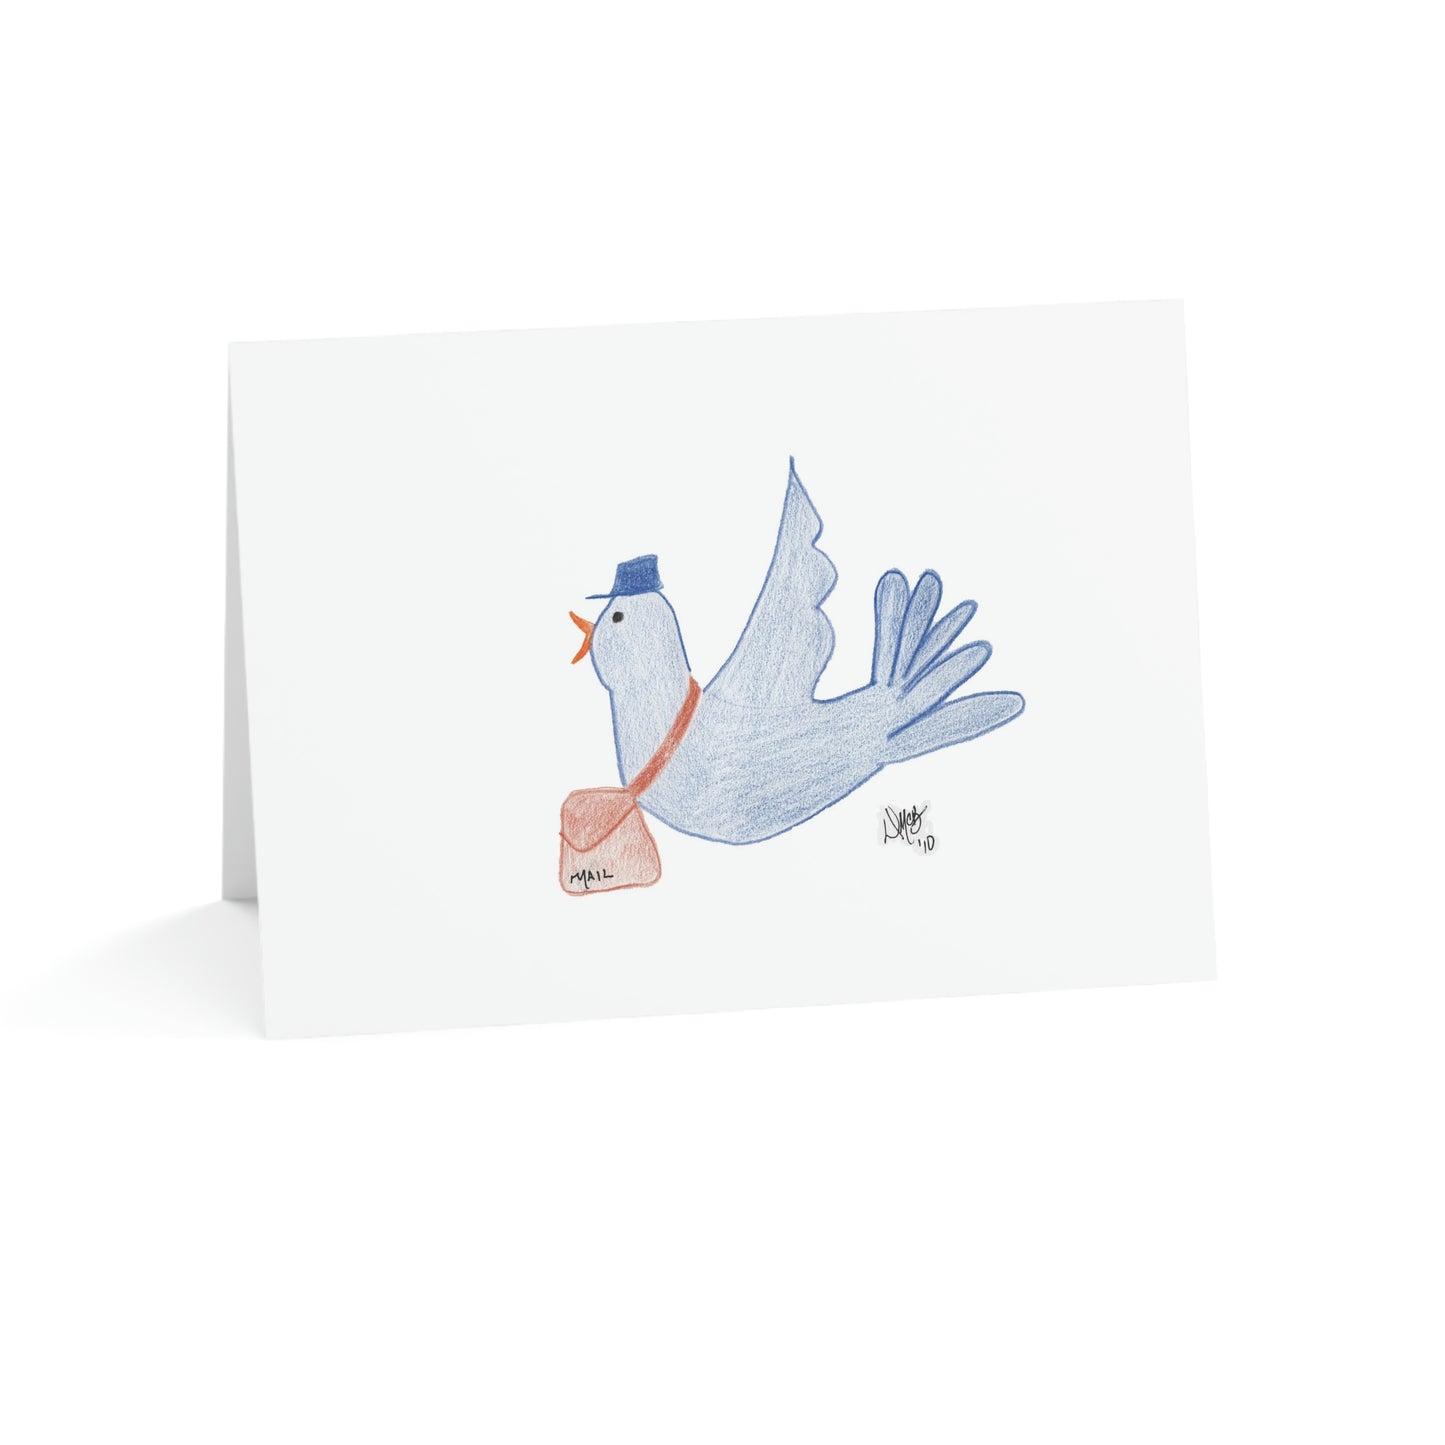 Thinking of You - Just Dropping in to Say Hello - Greeting Cards (1, 10, 30, and 50pcs)